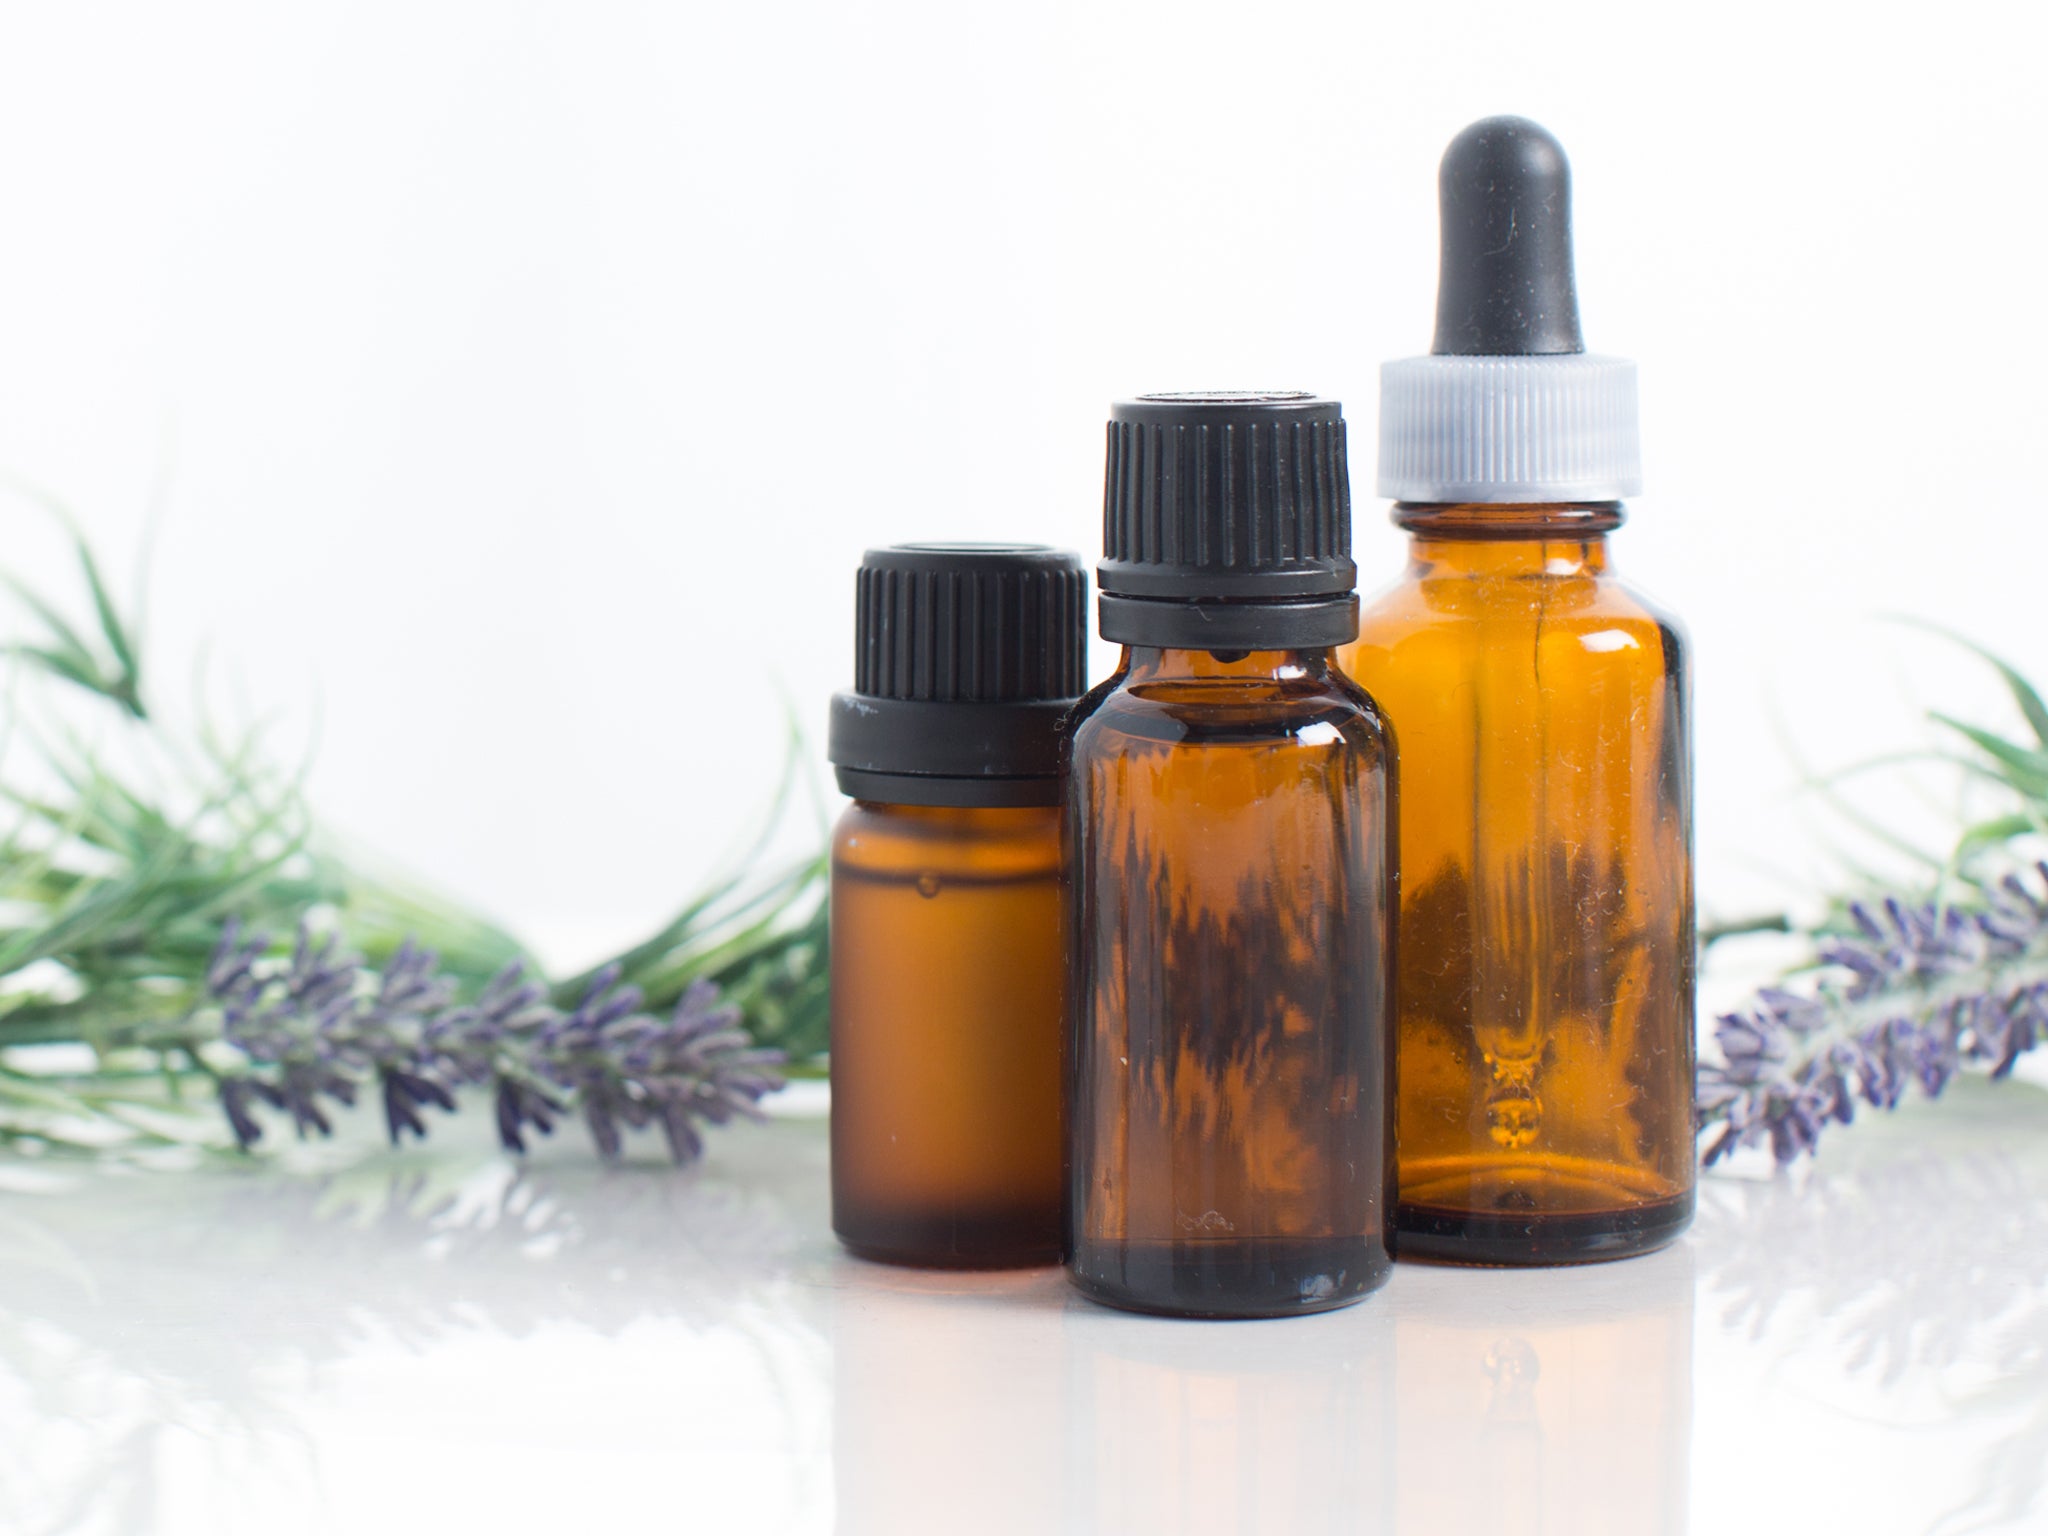 The offending essential oils are found in a range of cosmetics and bath products